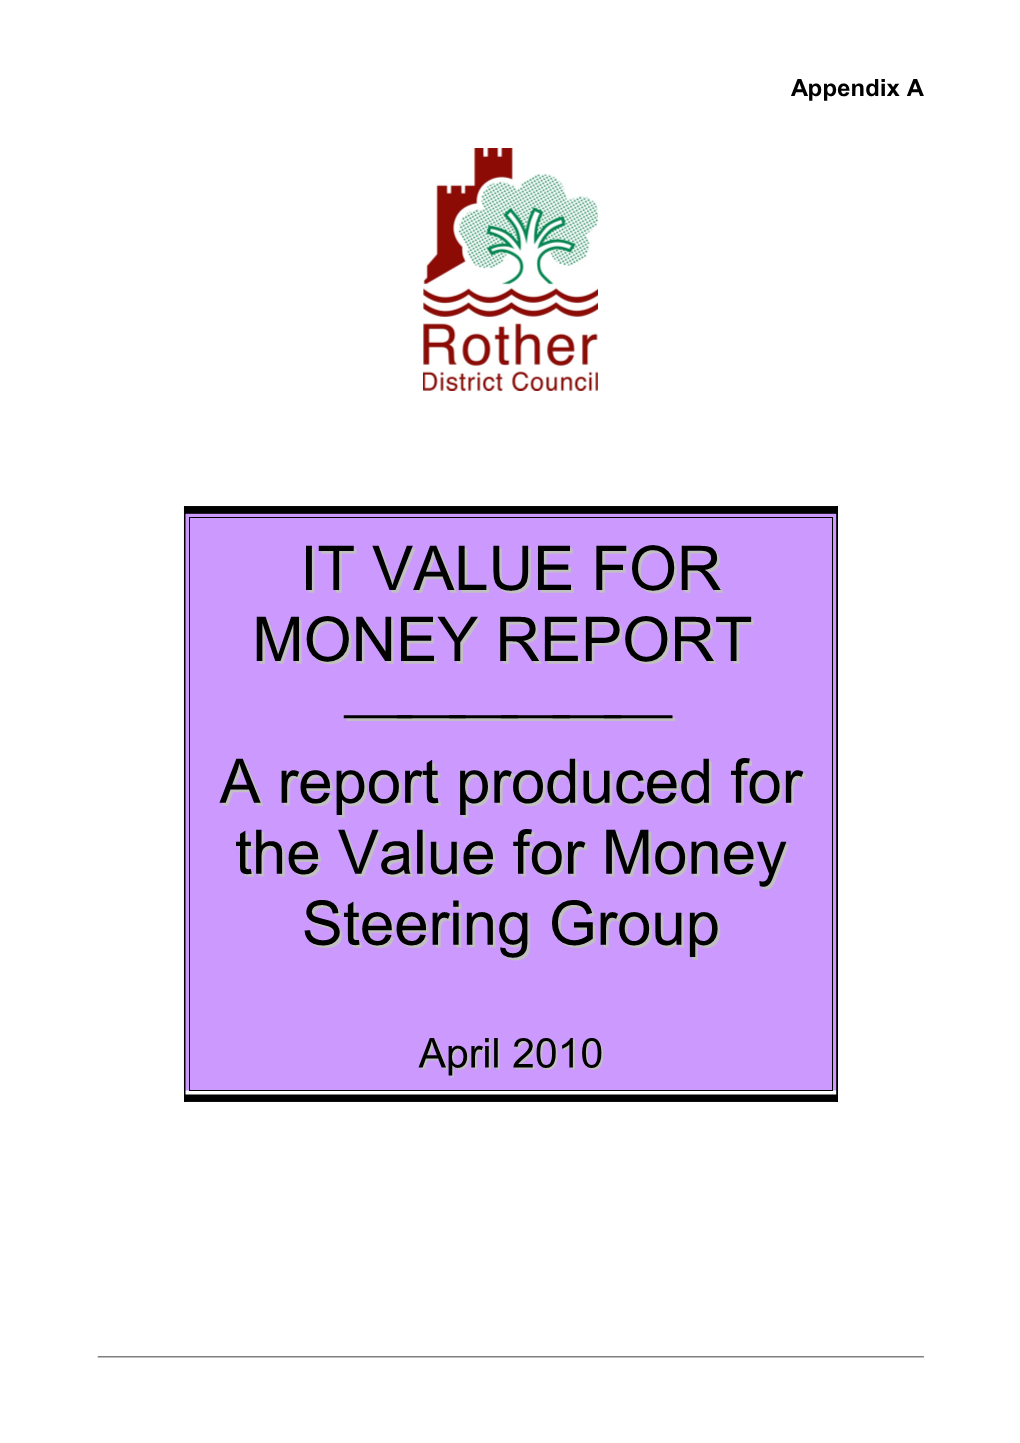 IT Value for Money Report